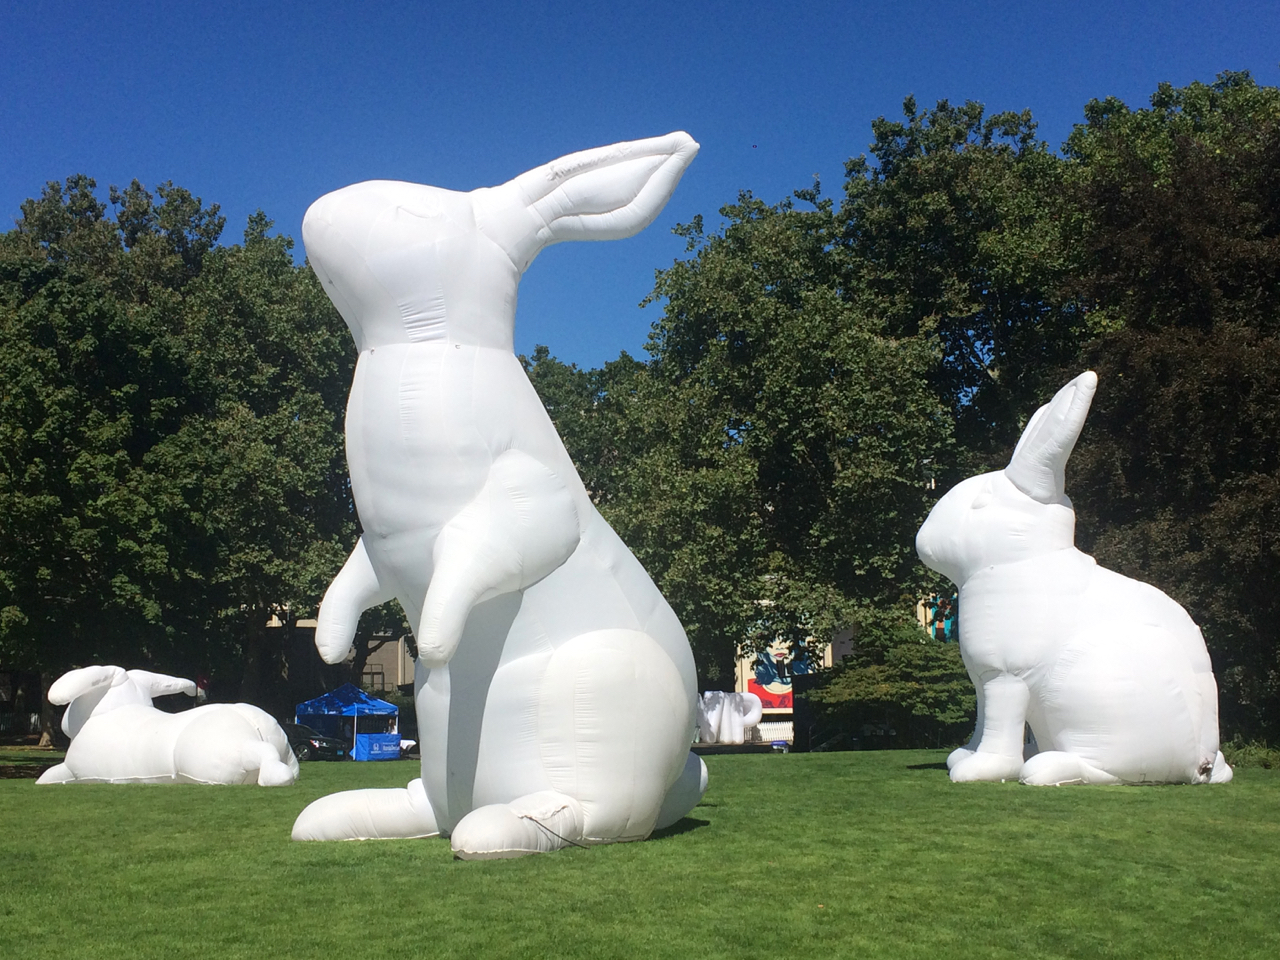 The bunnies seemed to multiply. Photo by Kimberly Robinson